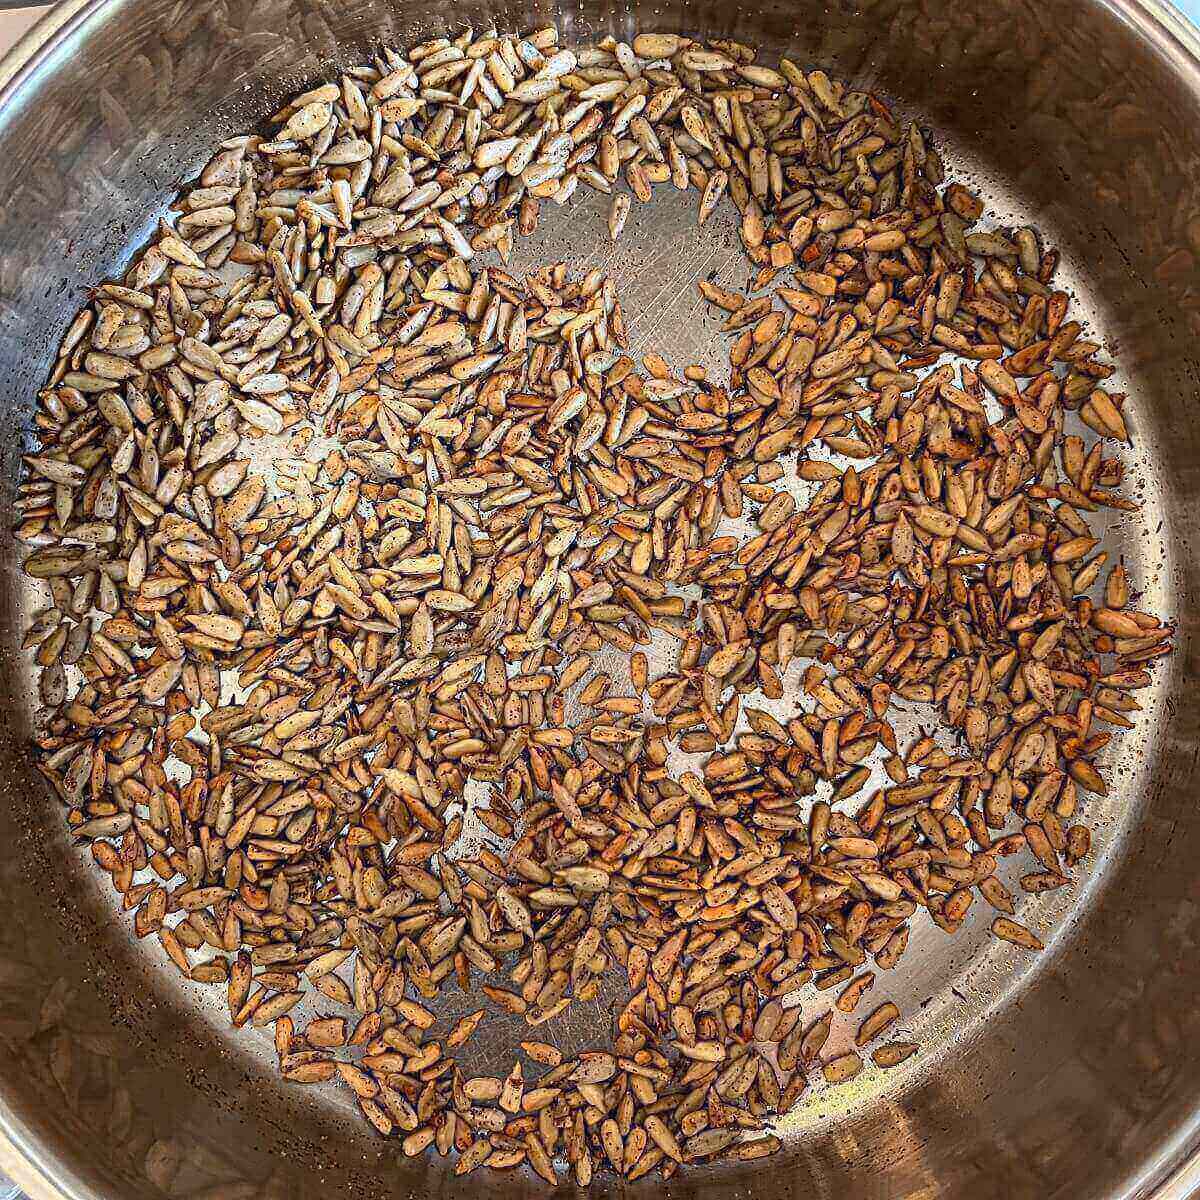 Toasted sunflower seeds in a pan.